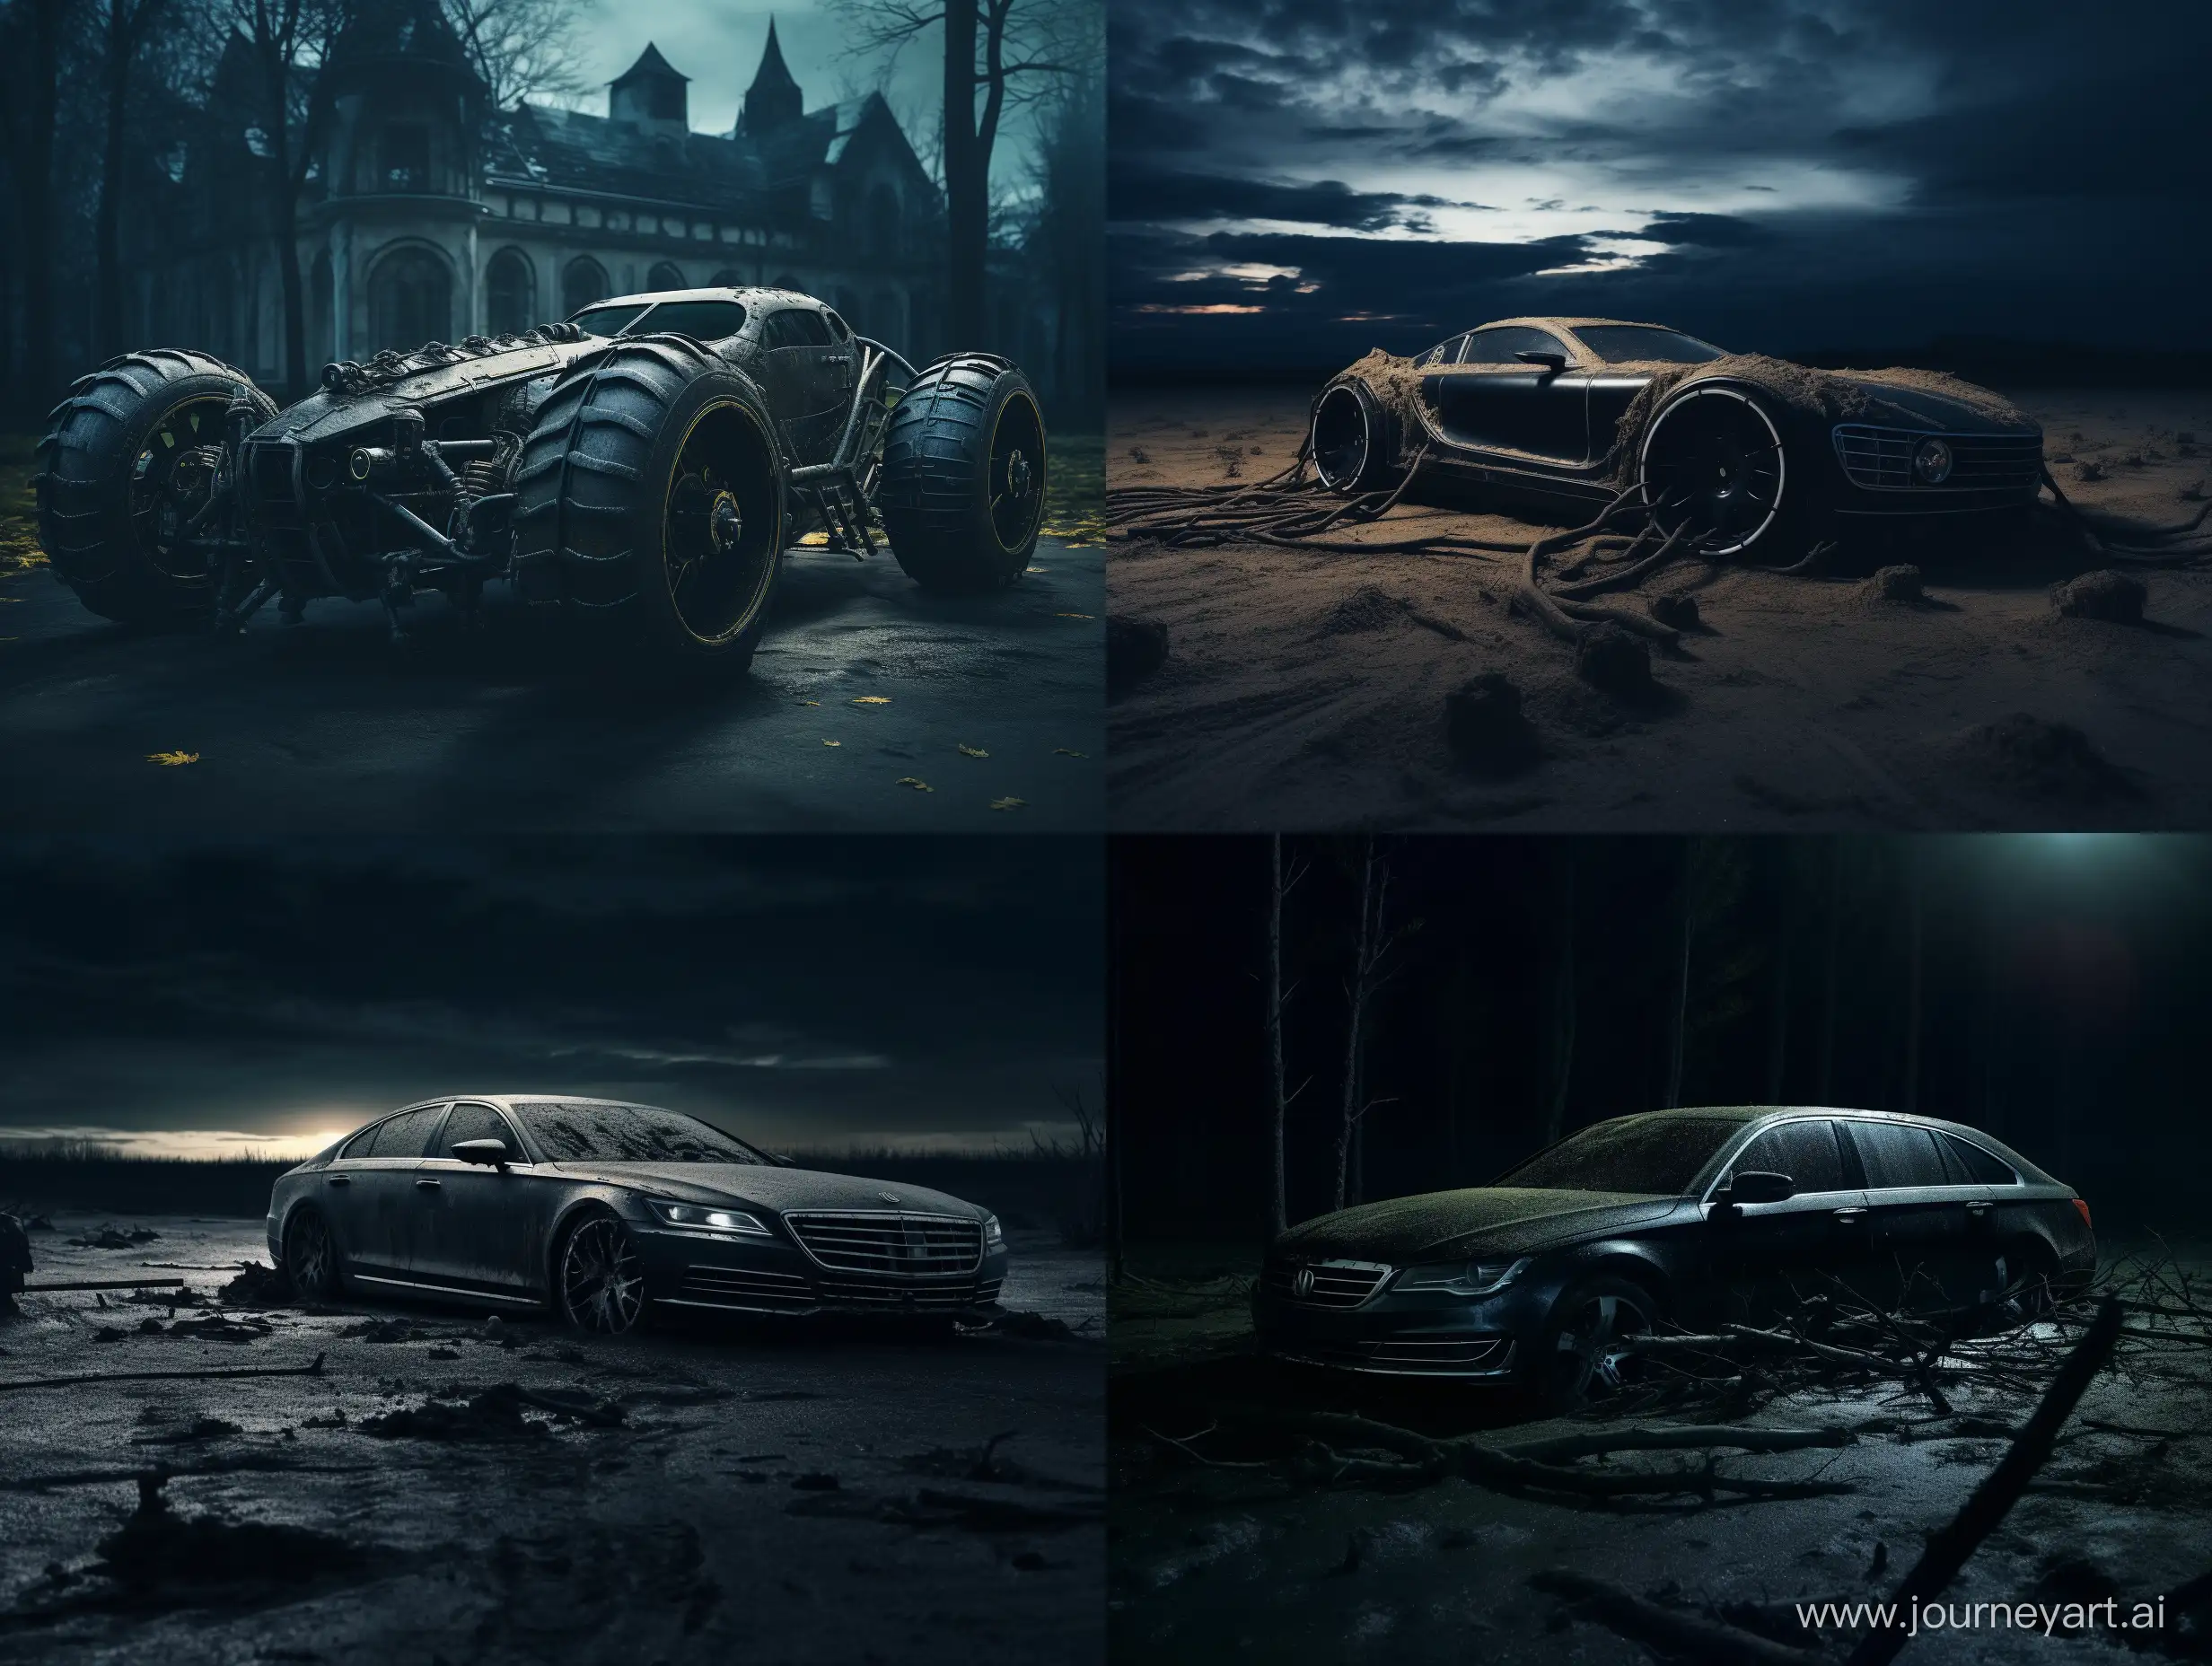 car without wheels, car service, dark beautiful photo for the album cover